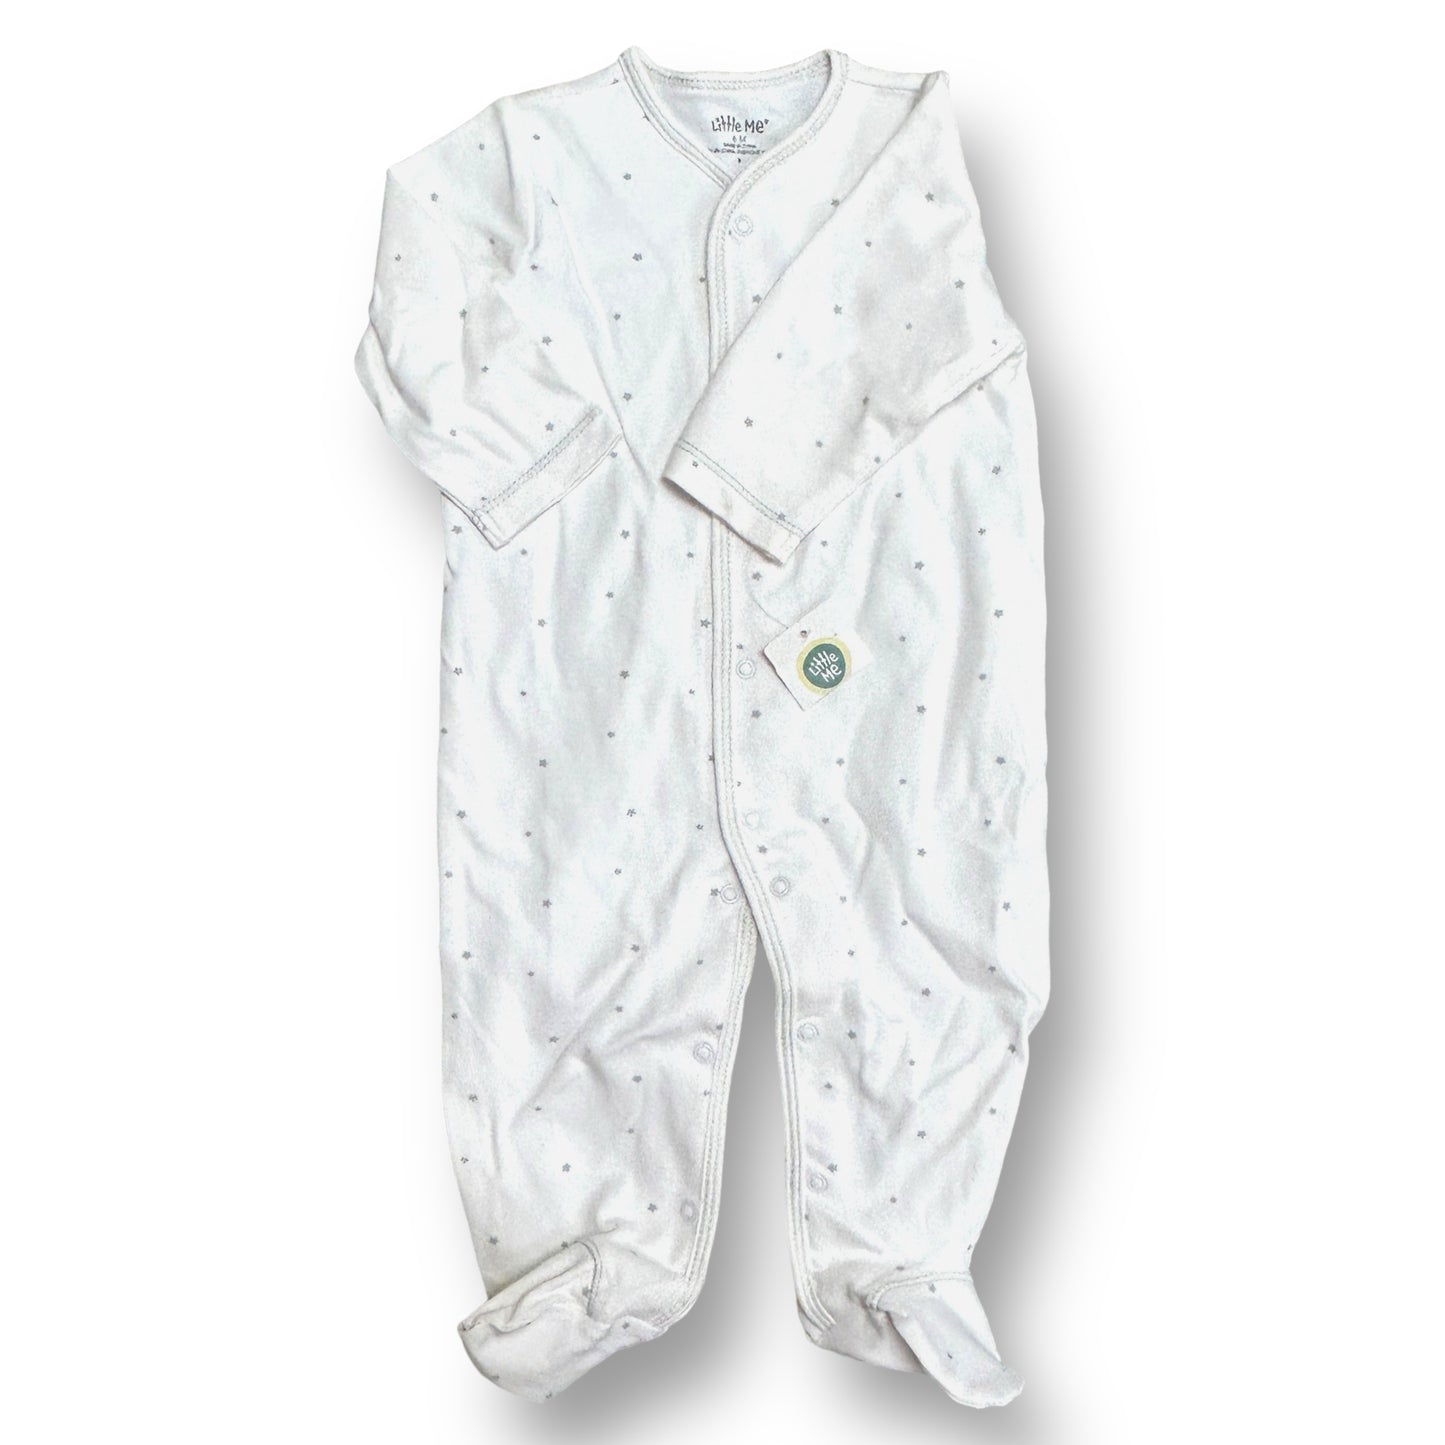 NEW! Boys Little Me Size 6 Months White Star Print Snap One-Piece